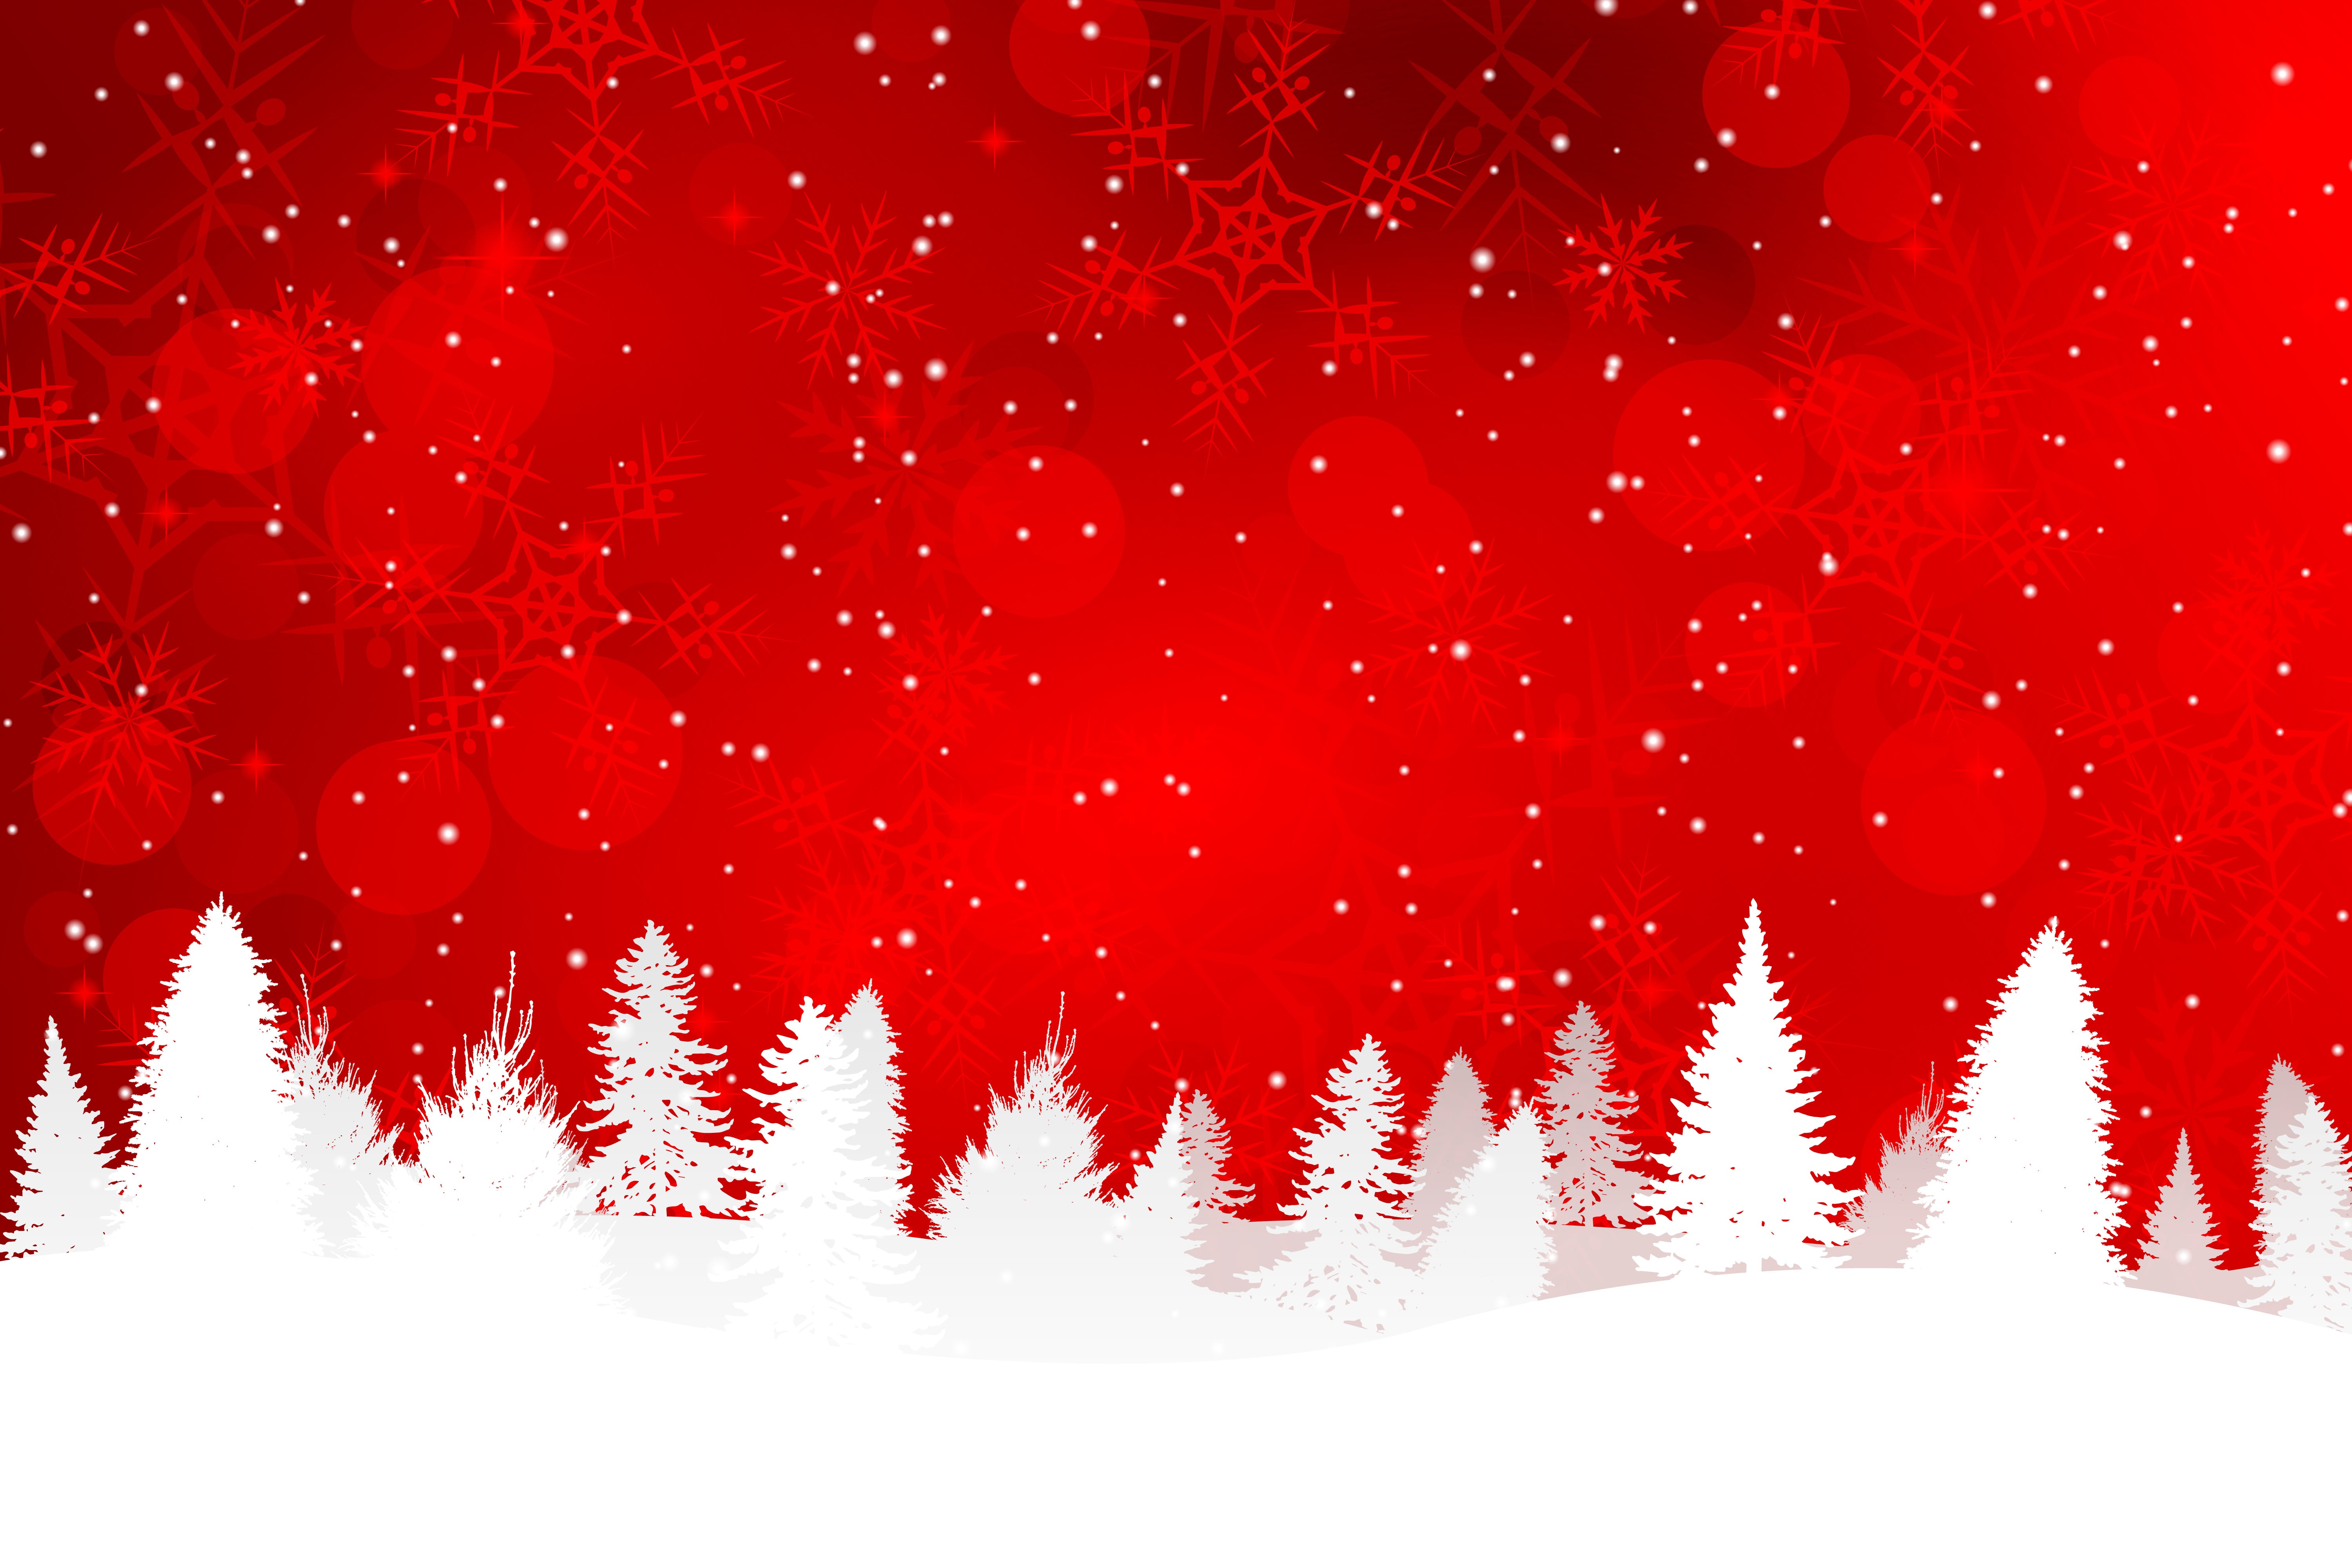 with snowy hills christmas photos background 